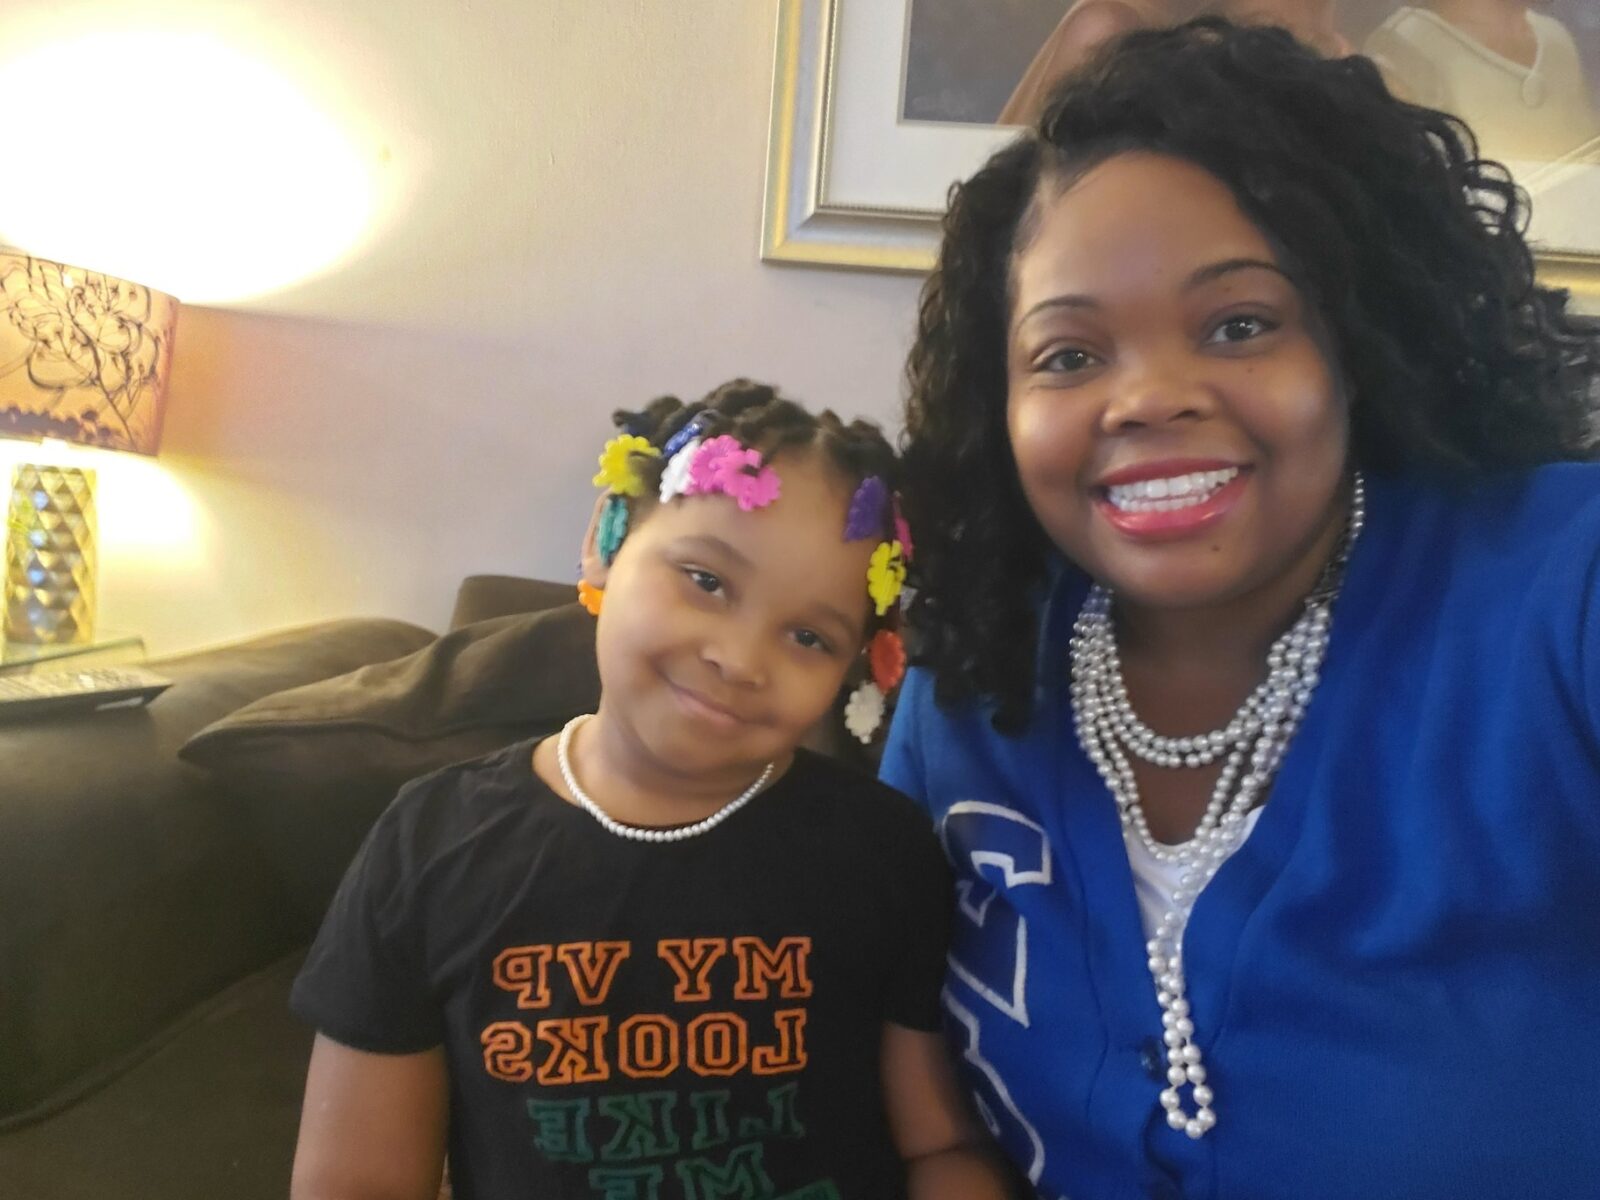 Councilmember Katherine Gilmore-Richardson, a member of Zeta Phi Beta Sorority, Inc., with daughter Katherine, 6, wearing her pearls and sorority blue on Inauguration Day. (Courtesy of Councilmember Katherine Gilmore-Richardson)